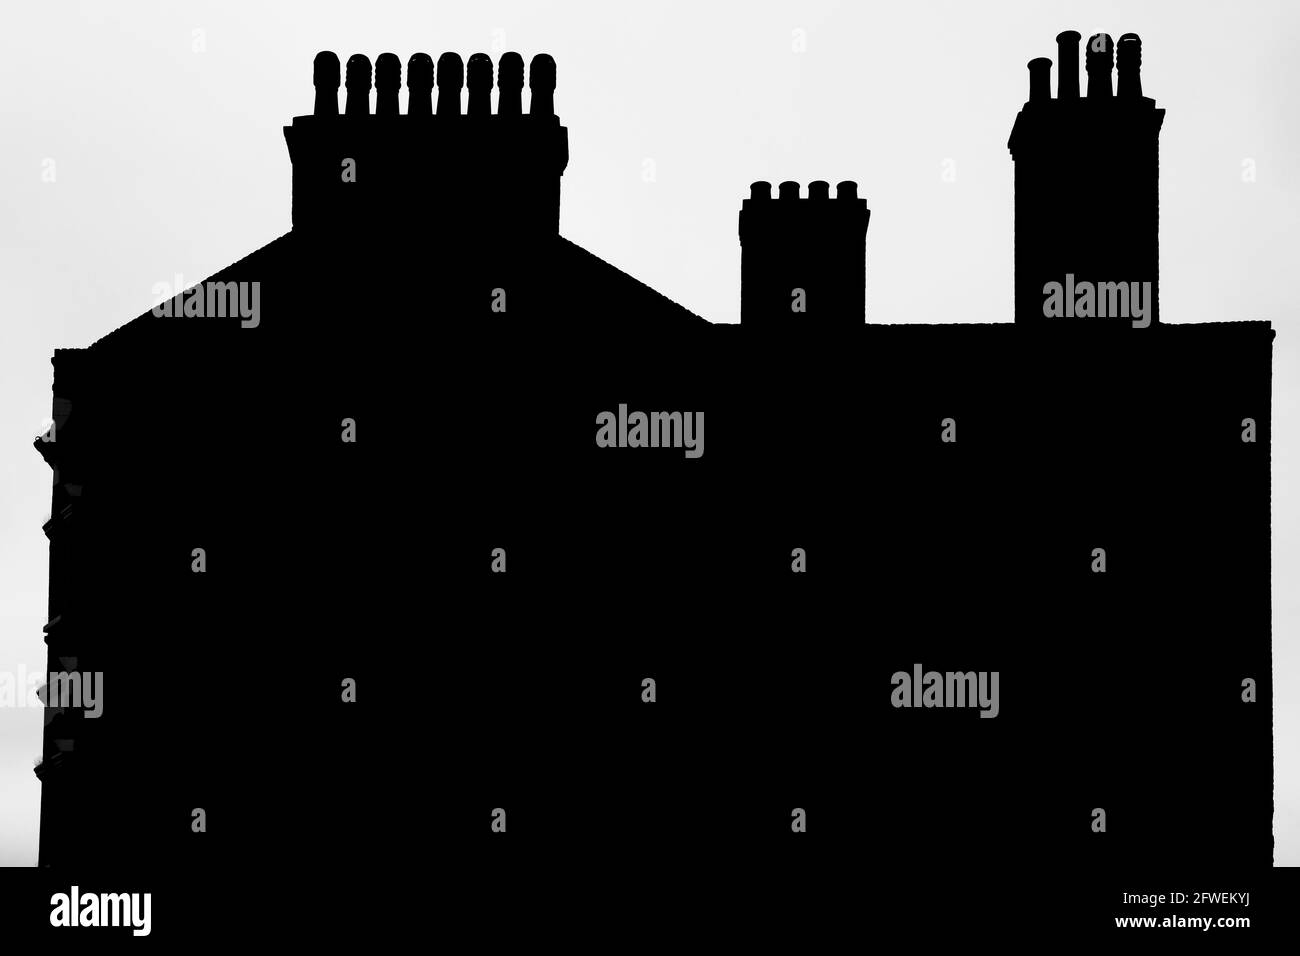 Silhouette of chimneys and rooftop of period building Stock Photo